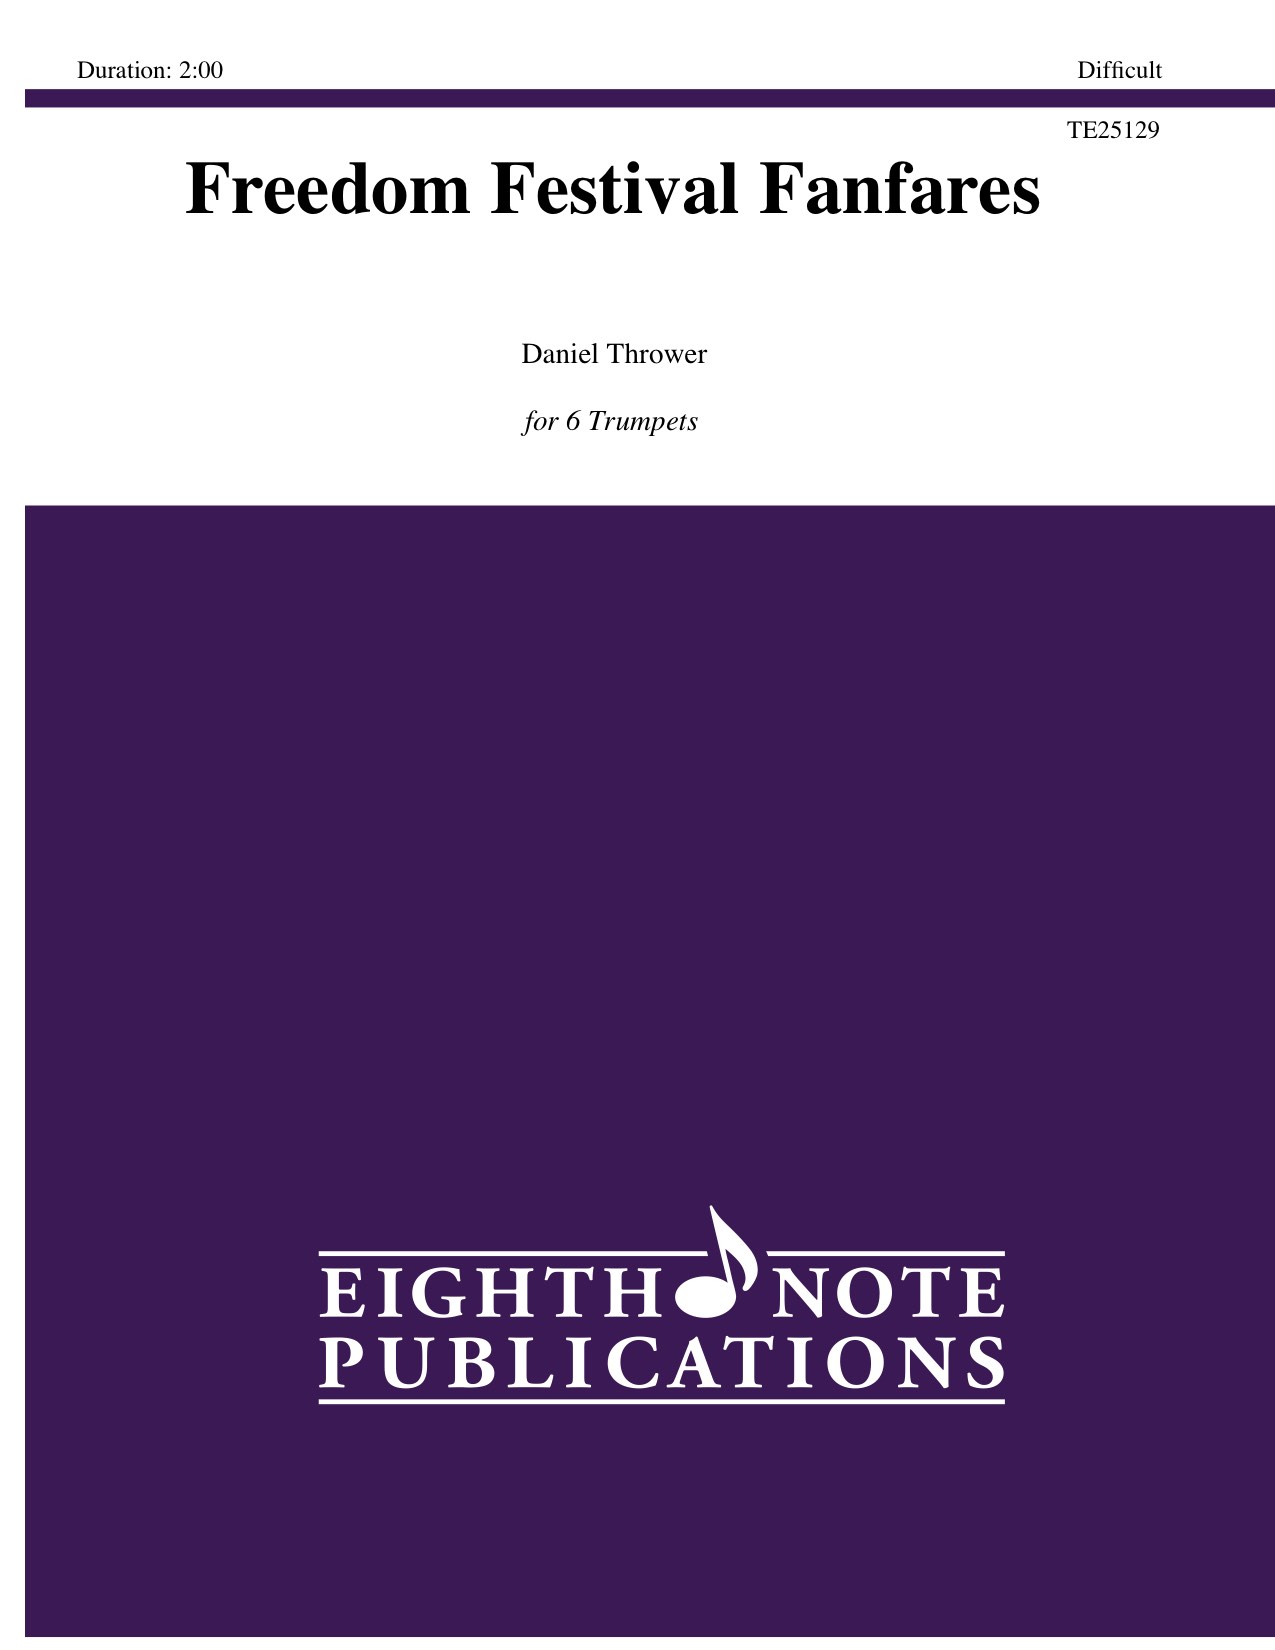 Freedom Festival Fanfares for 6 Trumpets